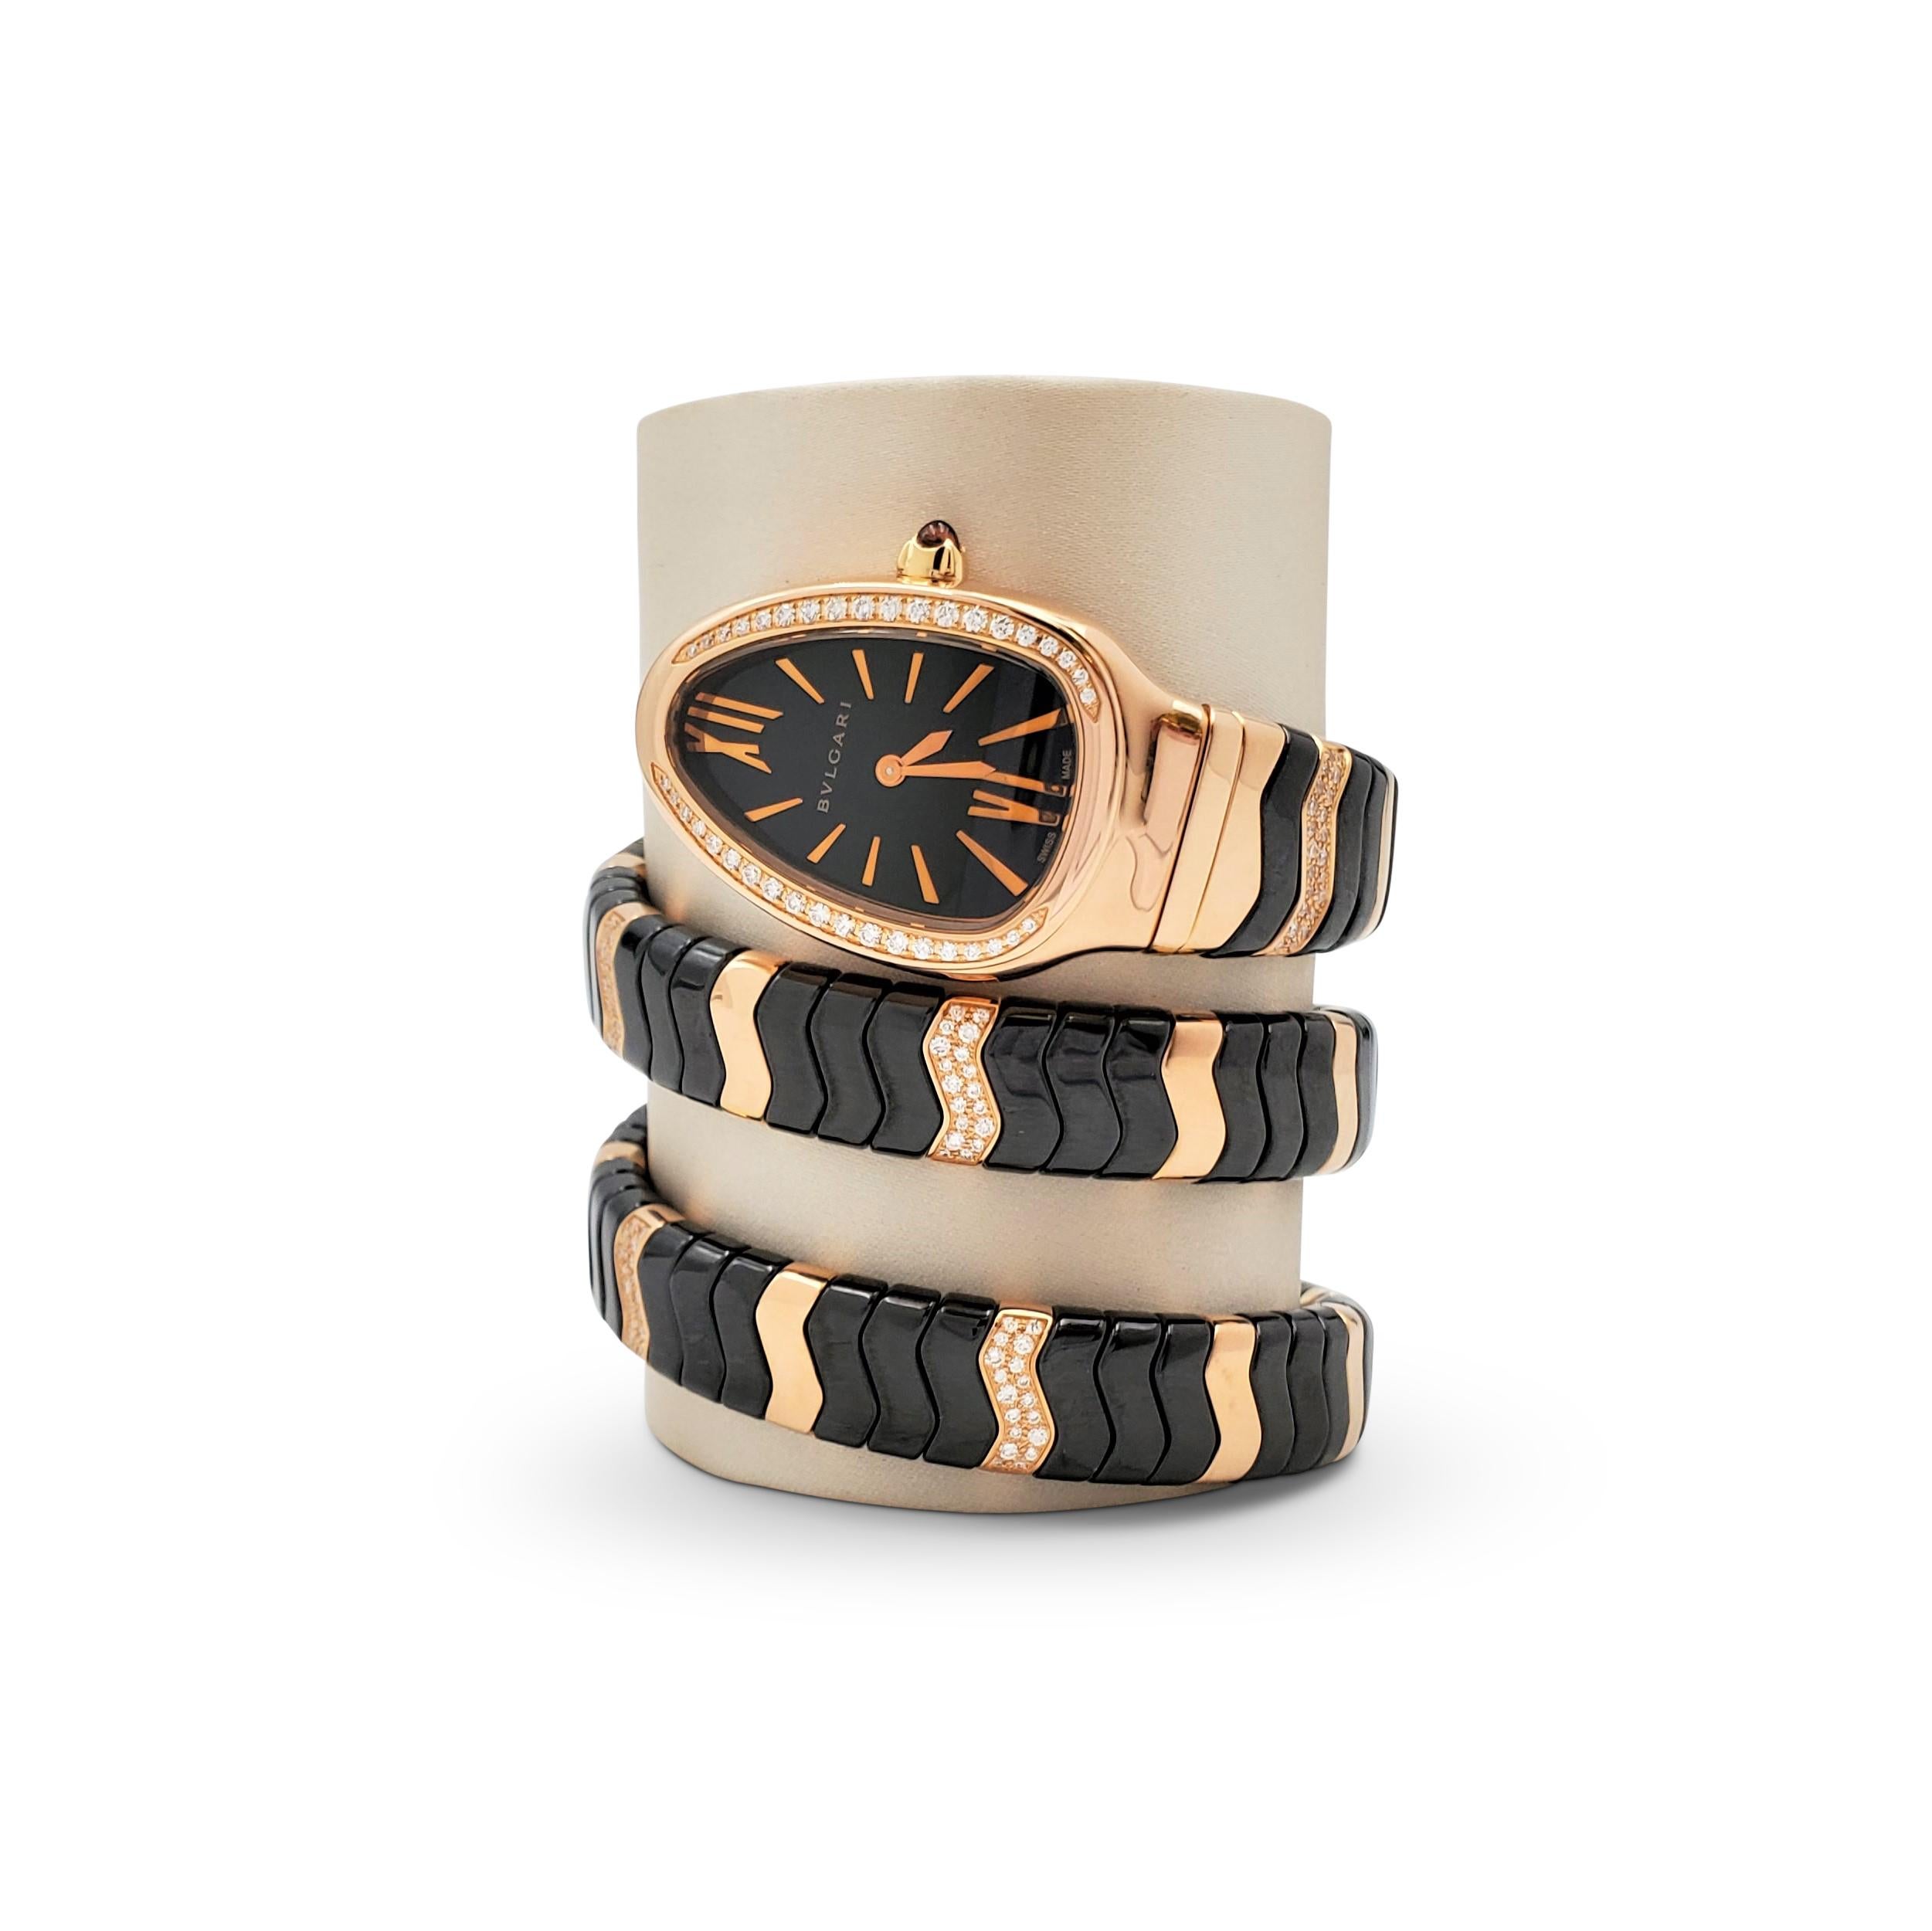 Authentic Bvlgari 'Serpenti Spiga' double spiral watch. The 33mm curved black ceramic case imitates the head of a snake and is completed by an 18 karat rose gold bezel set with round brilliant cut diamonds. A slick black lacquered dial is